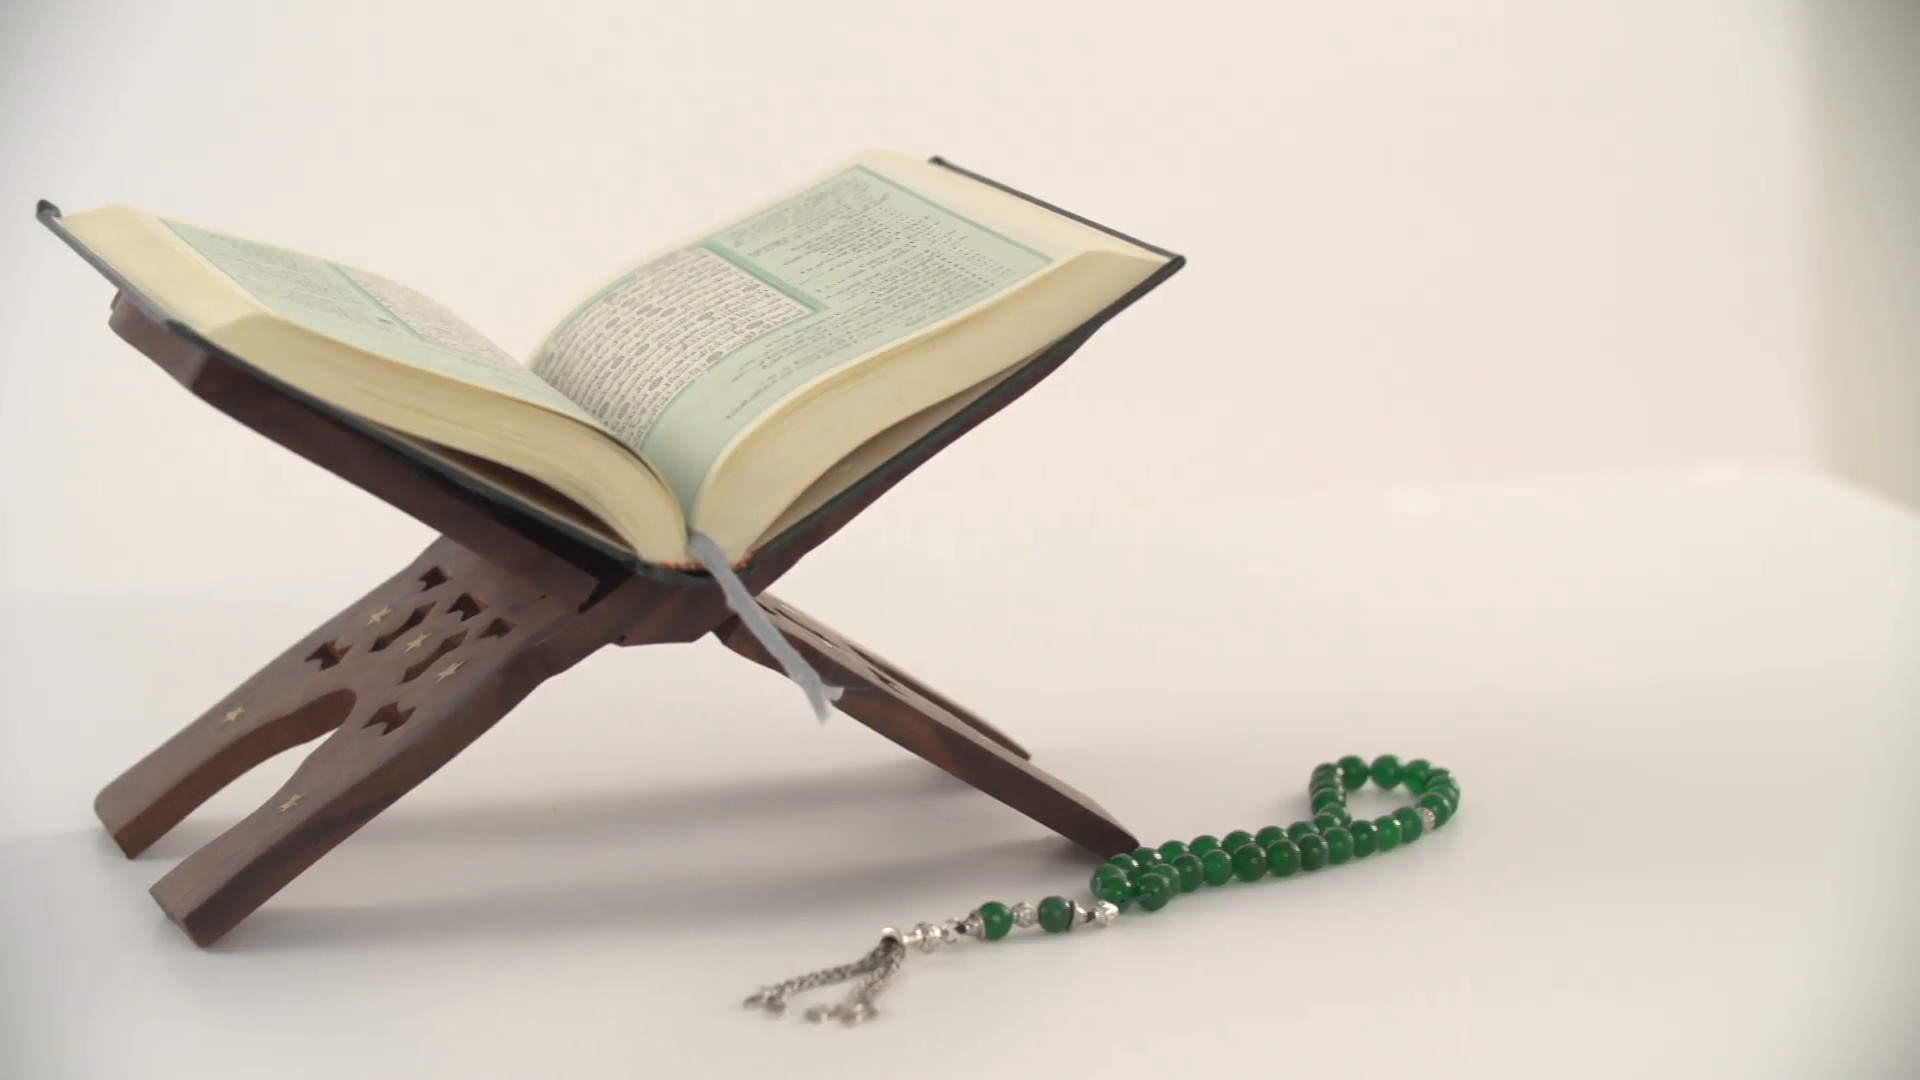 Prayer Beads With Holy Quran On Stand - Quran Stand Hd - HD Wallpaper 